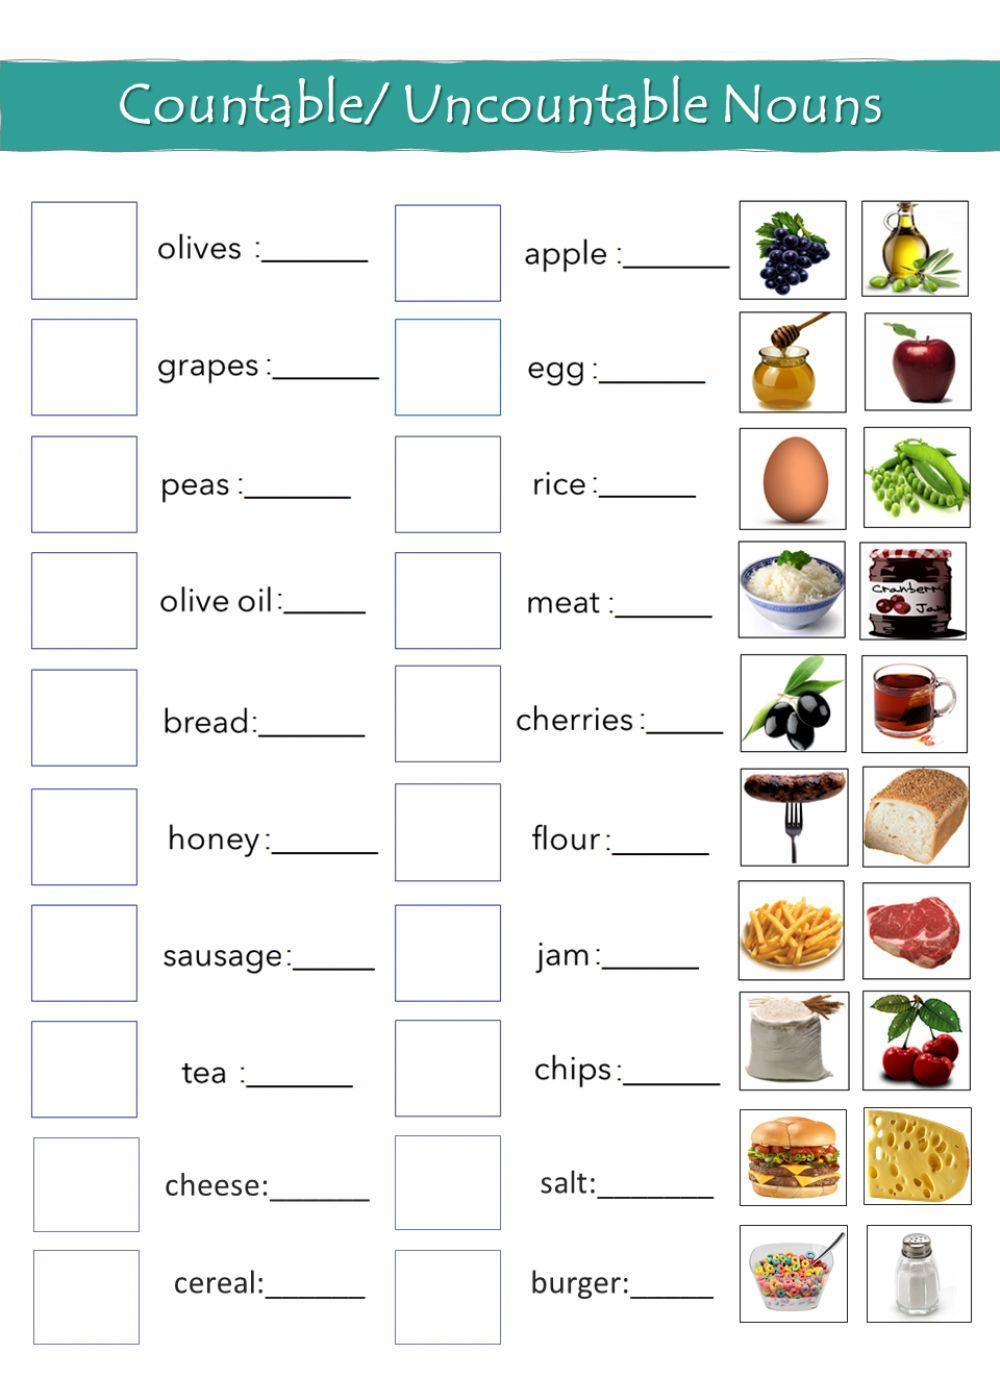 Countable And Uncountable Nouns Live Worksheet For Class 3